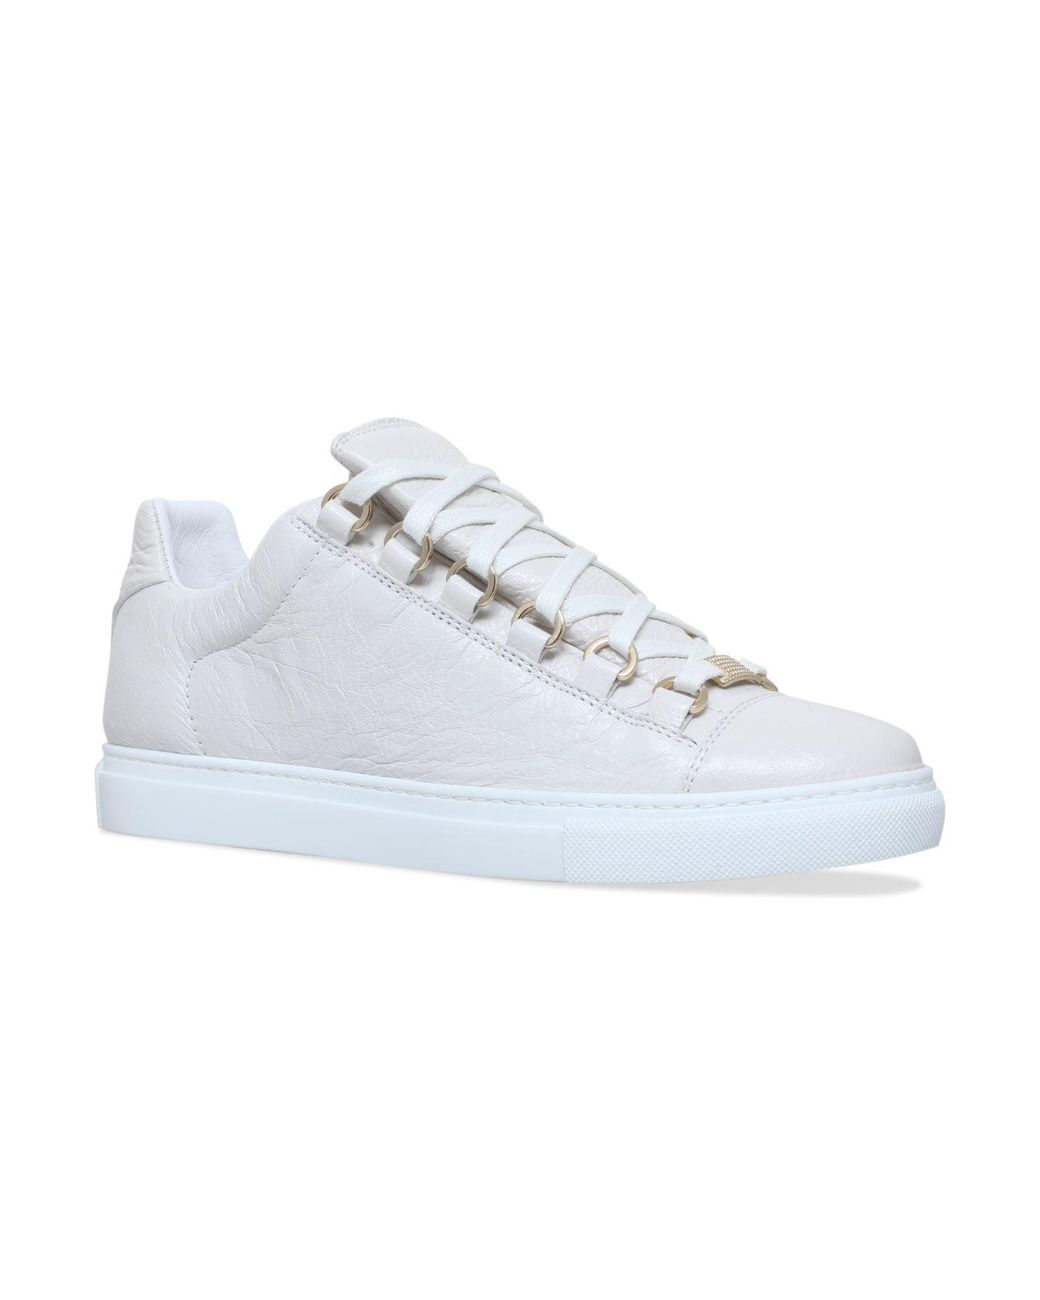 Balenciaga Arena Low Top Sneakers in White | Lyst UK